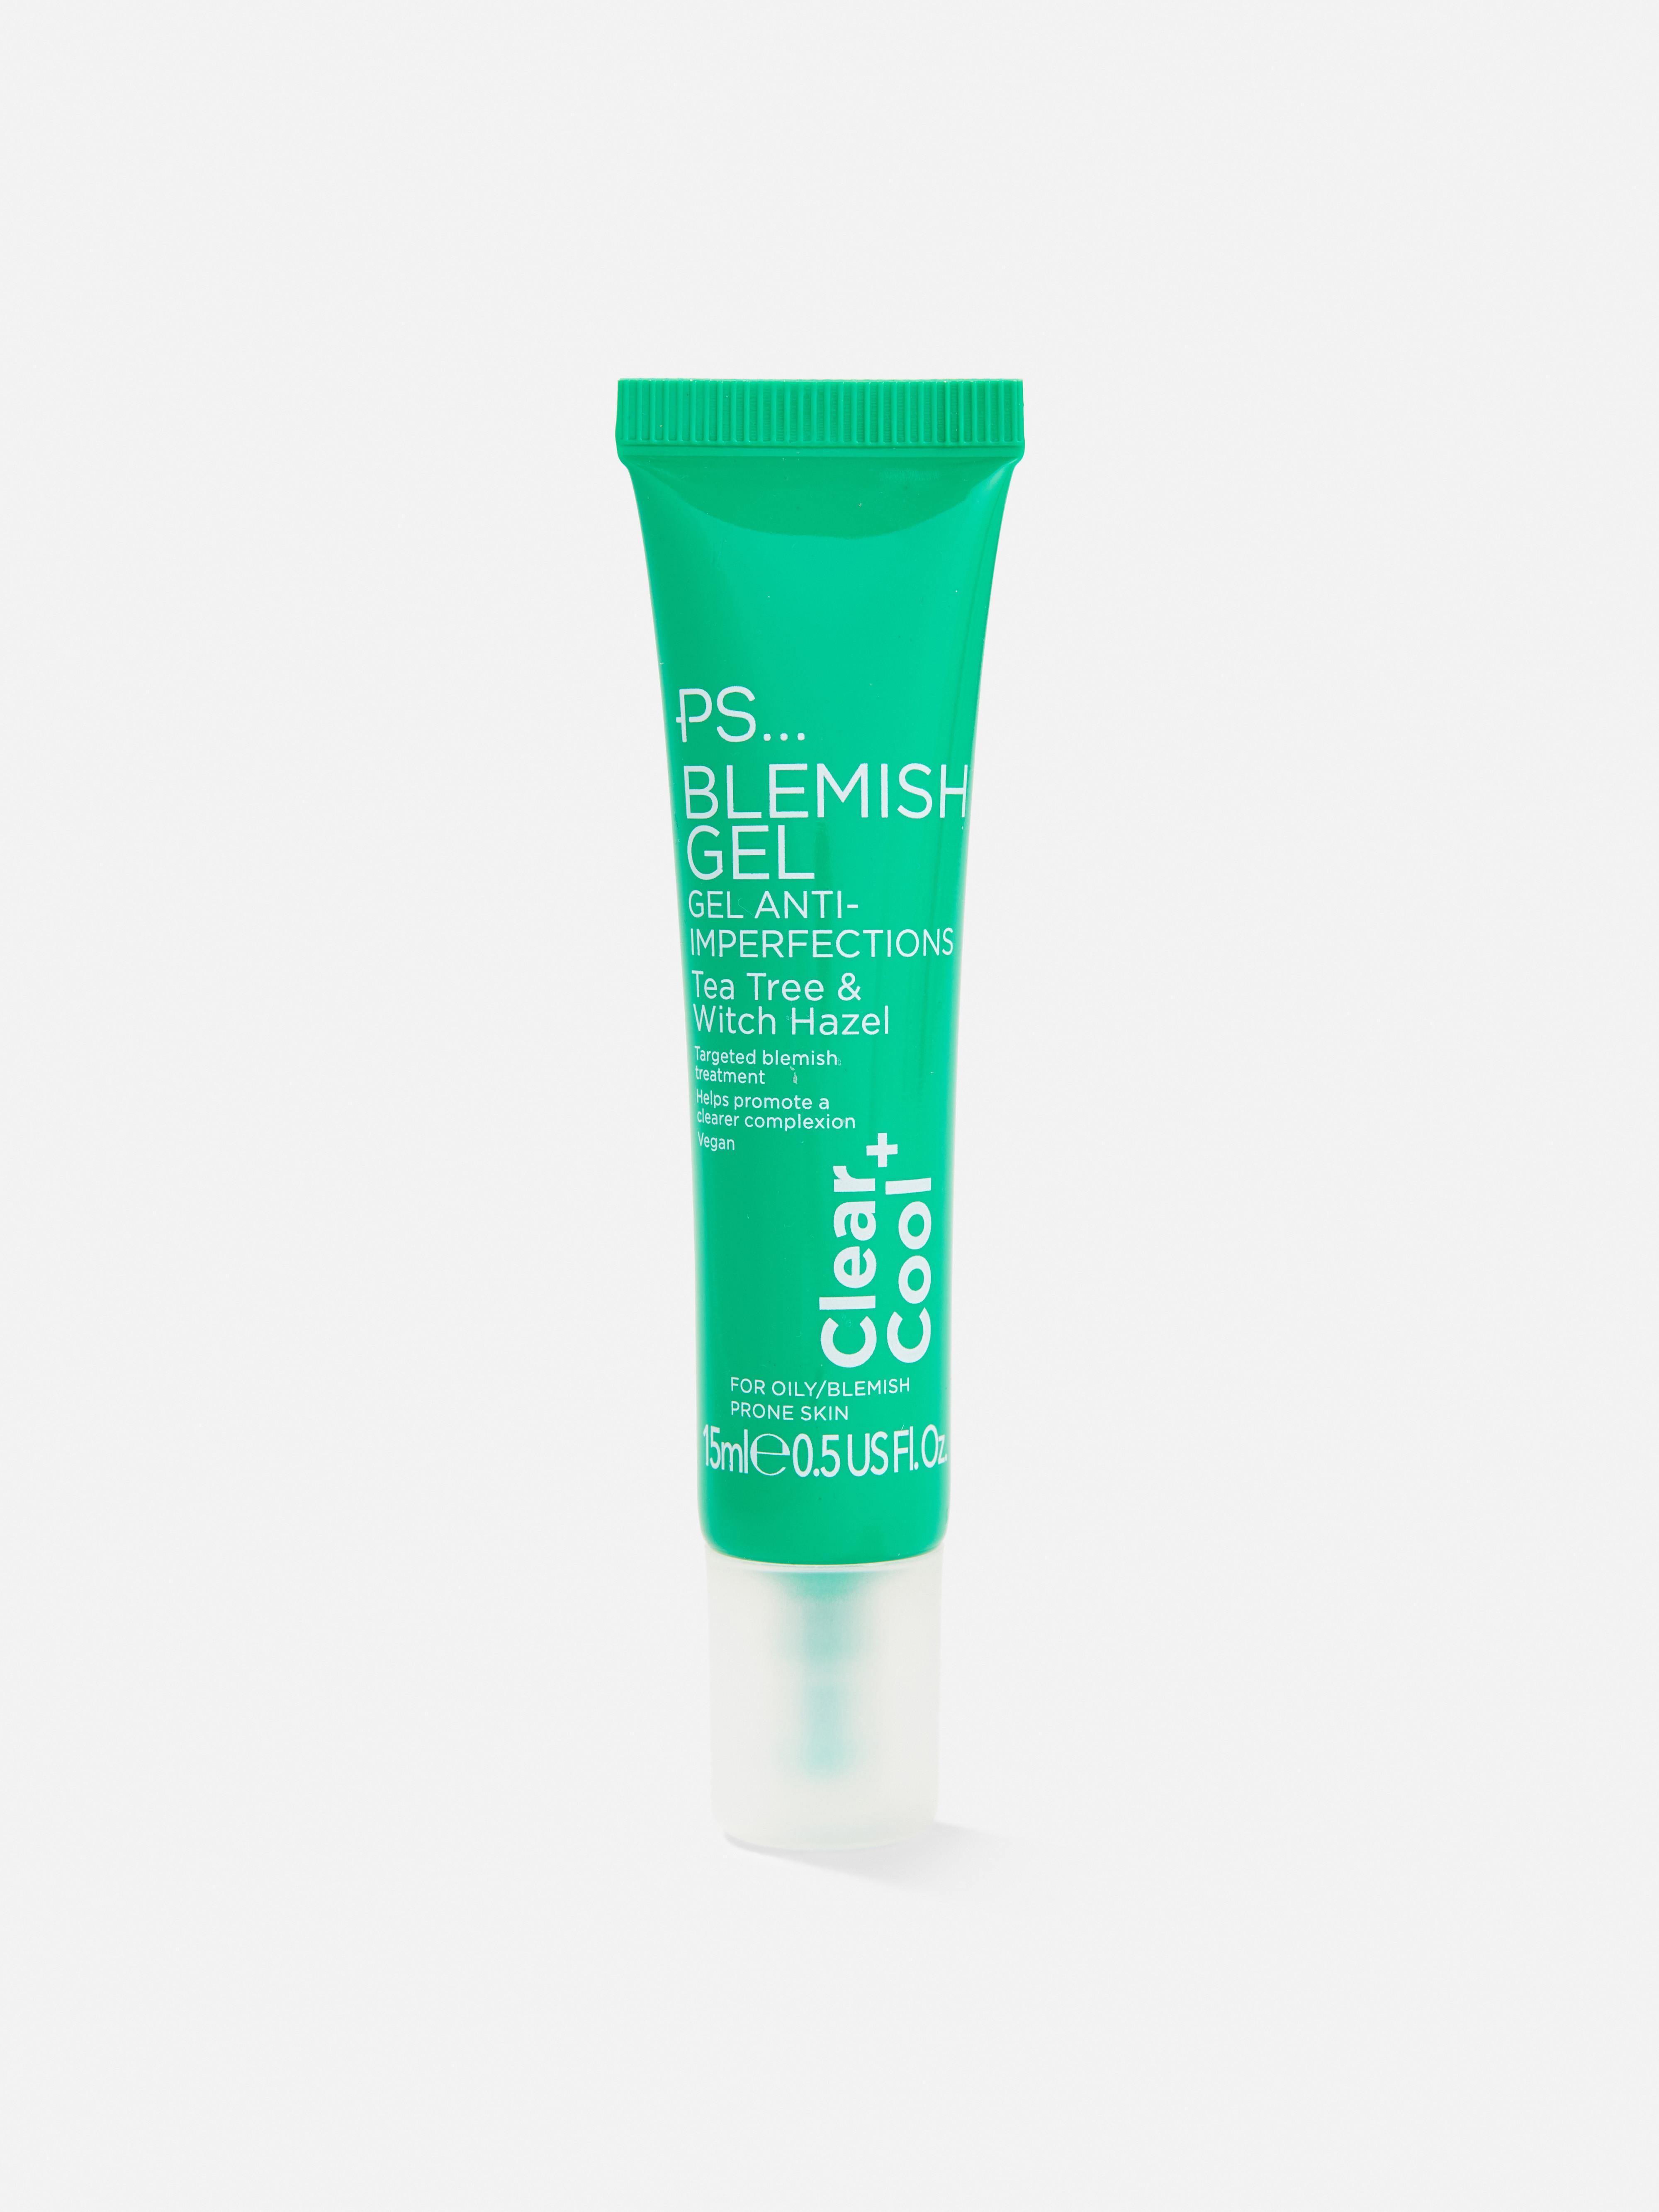 PS Clear + Cool Blemish Gel